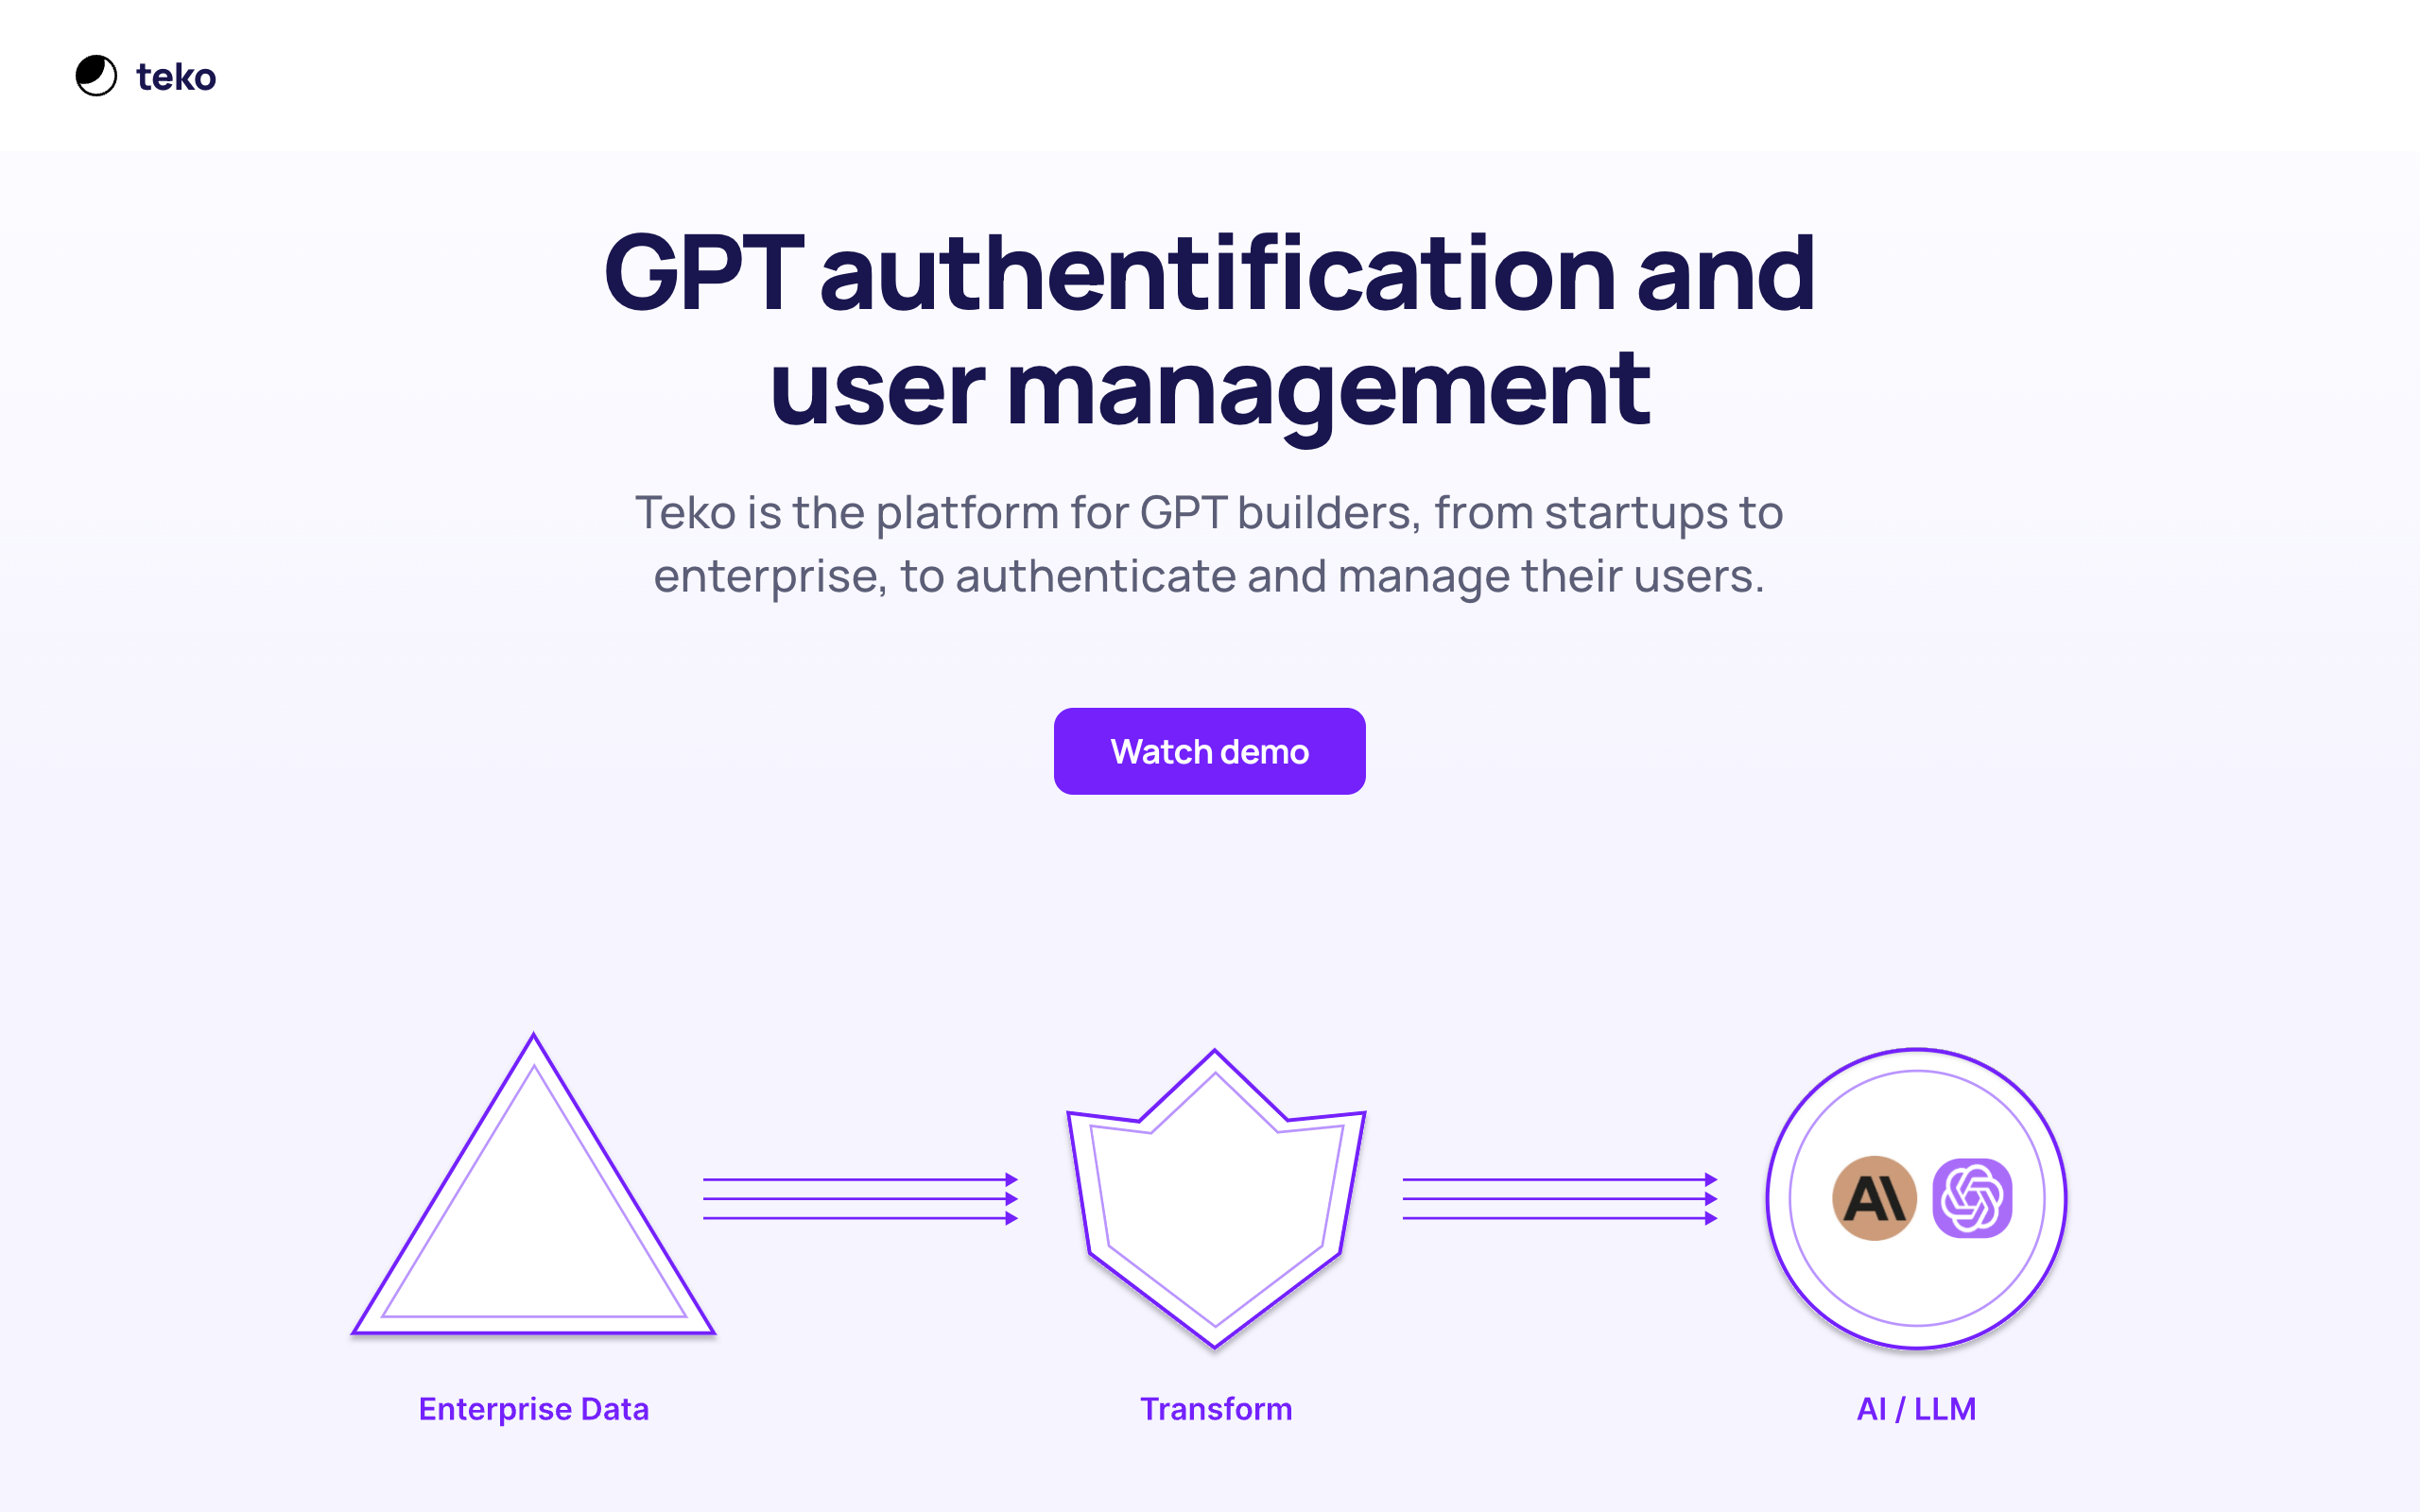 Teko is the platform for GPT builders, from startups to enterprise, to authenticate and manage their users.